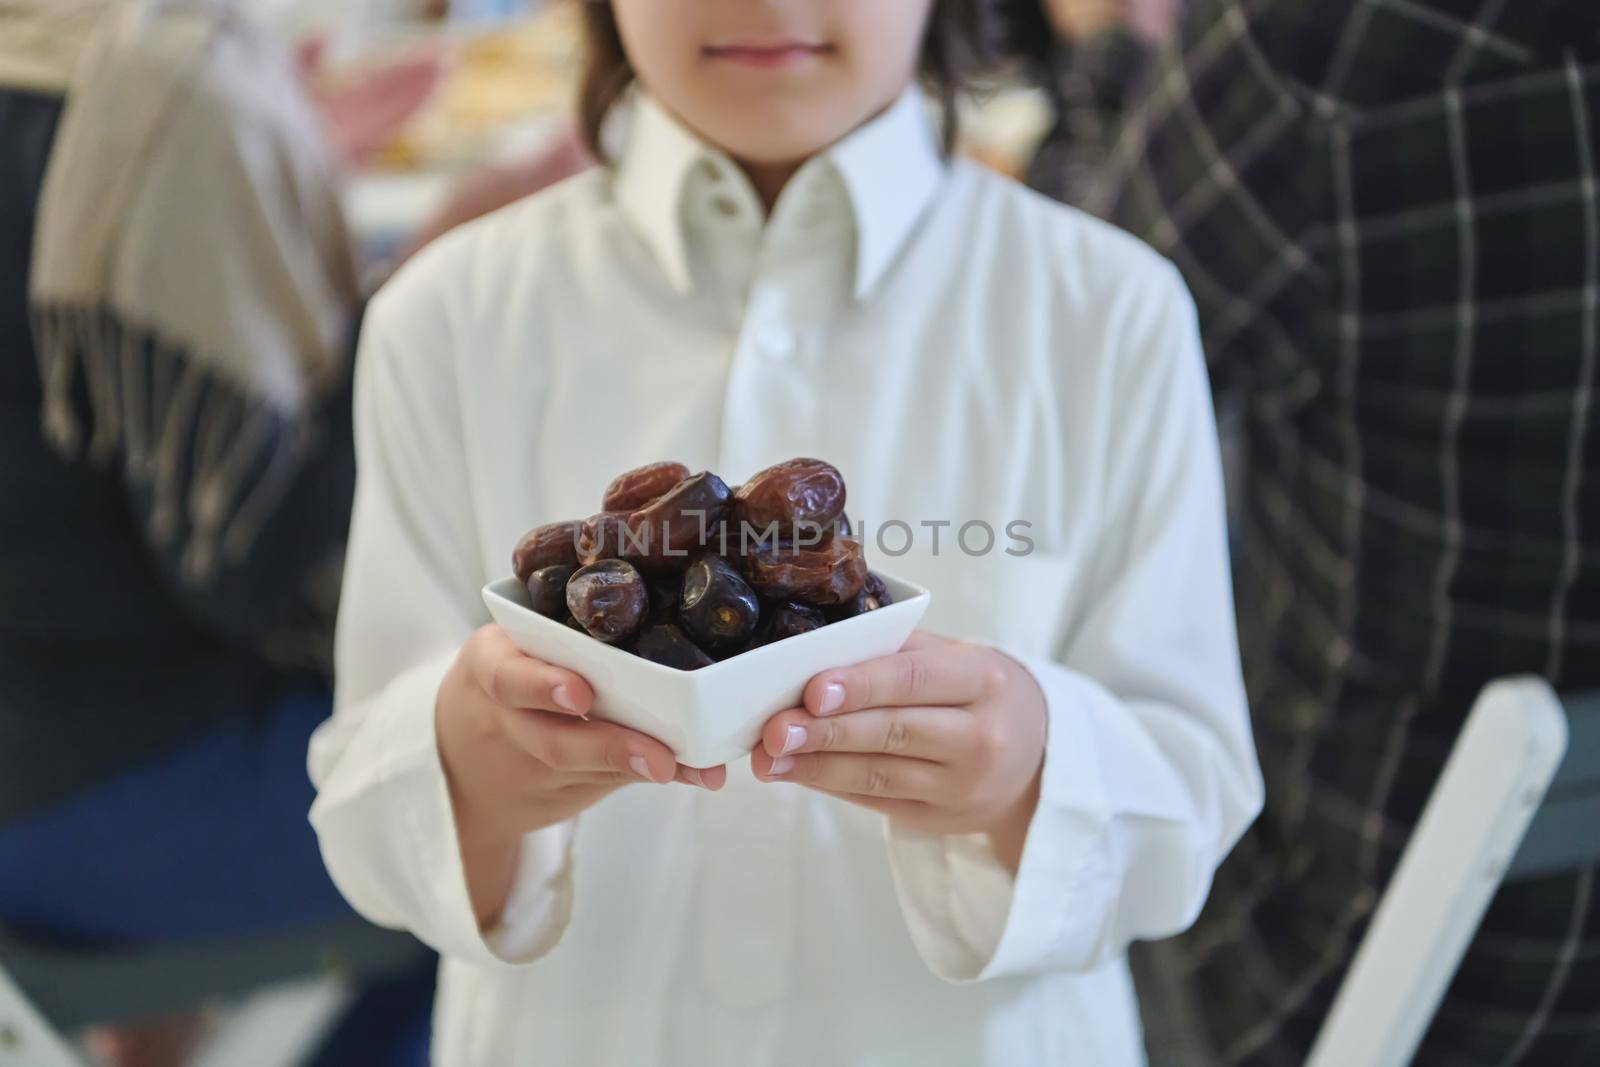 Arabian kid in the traditional clothes during iftar by dotshock